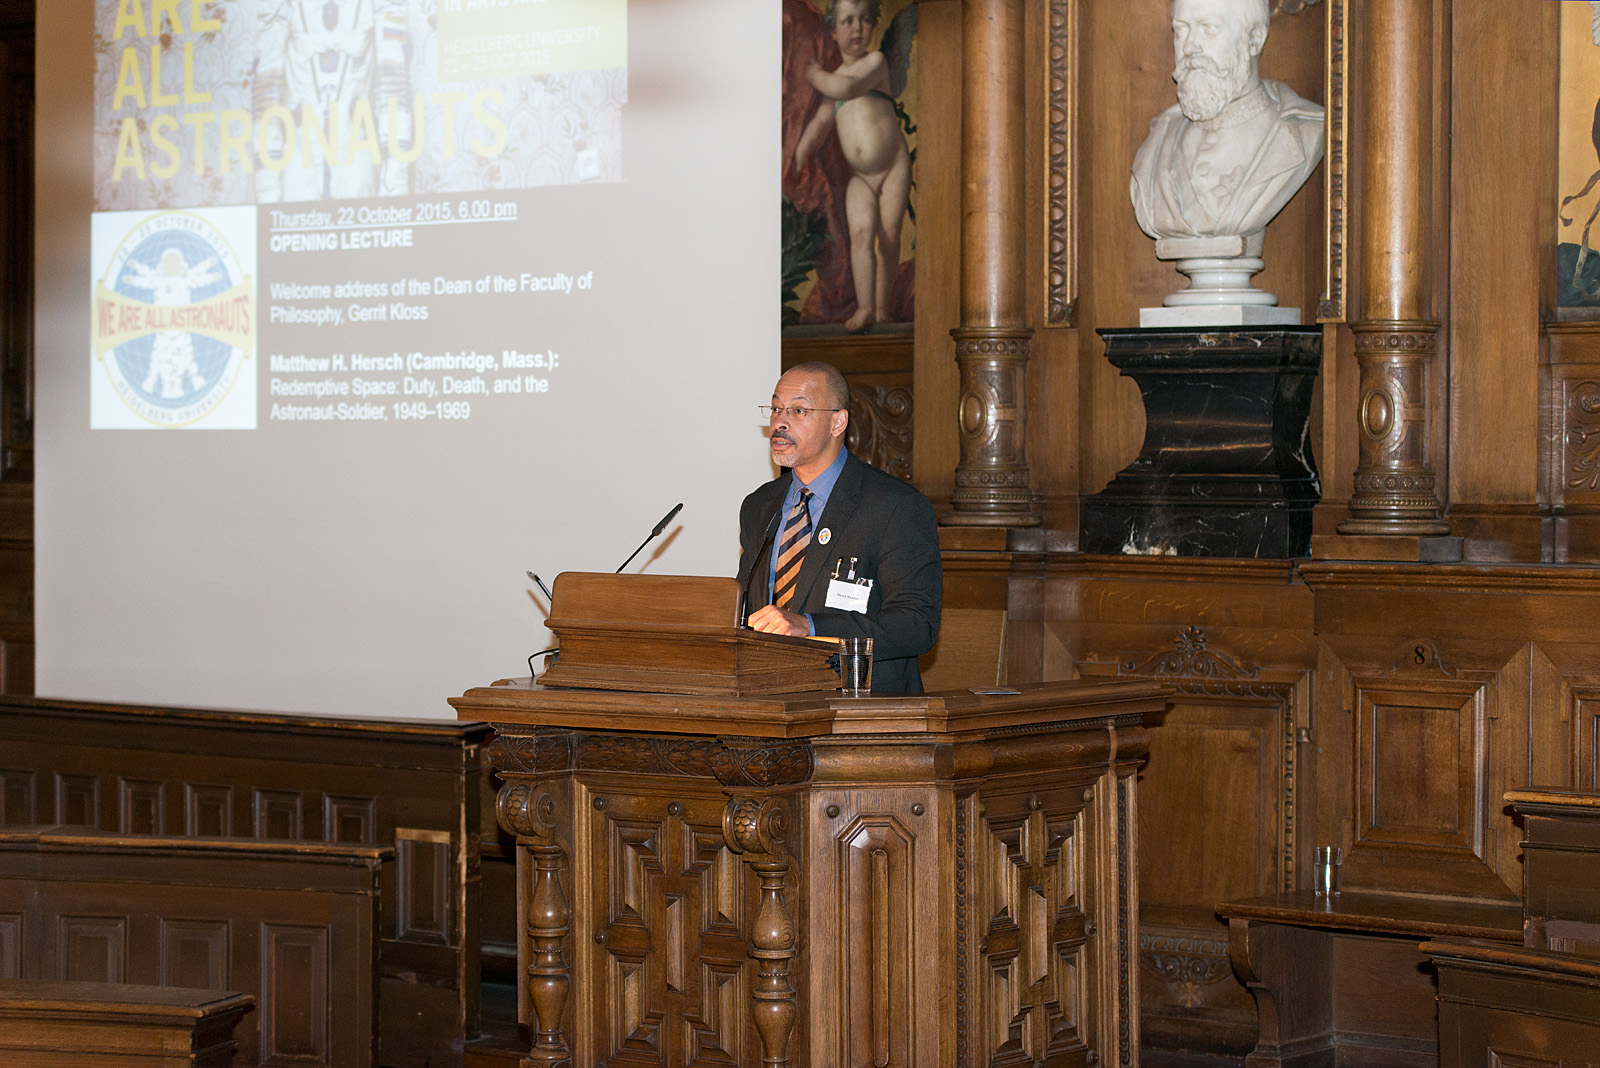 22 October, 2015 | OPENING LECTURE: Henry Keazor